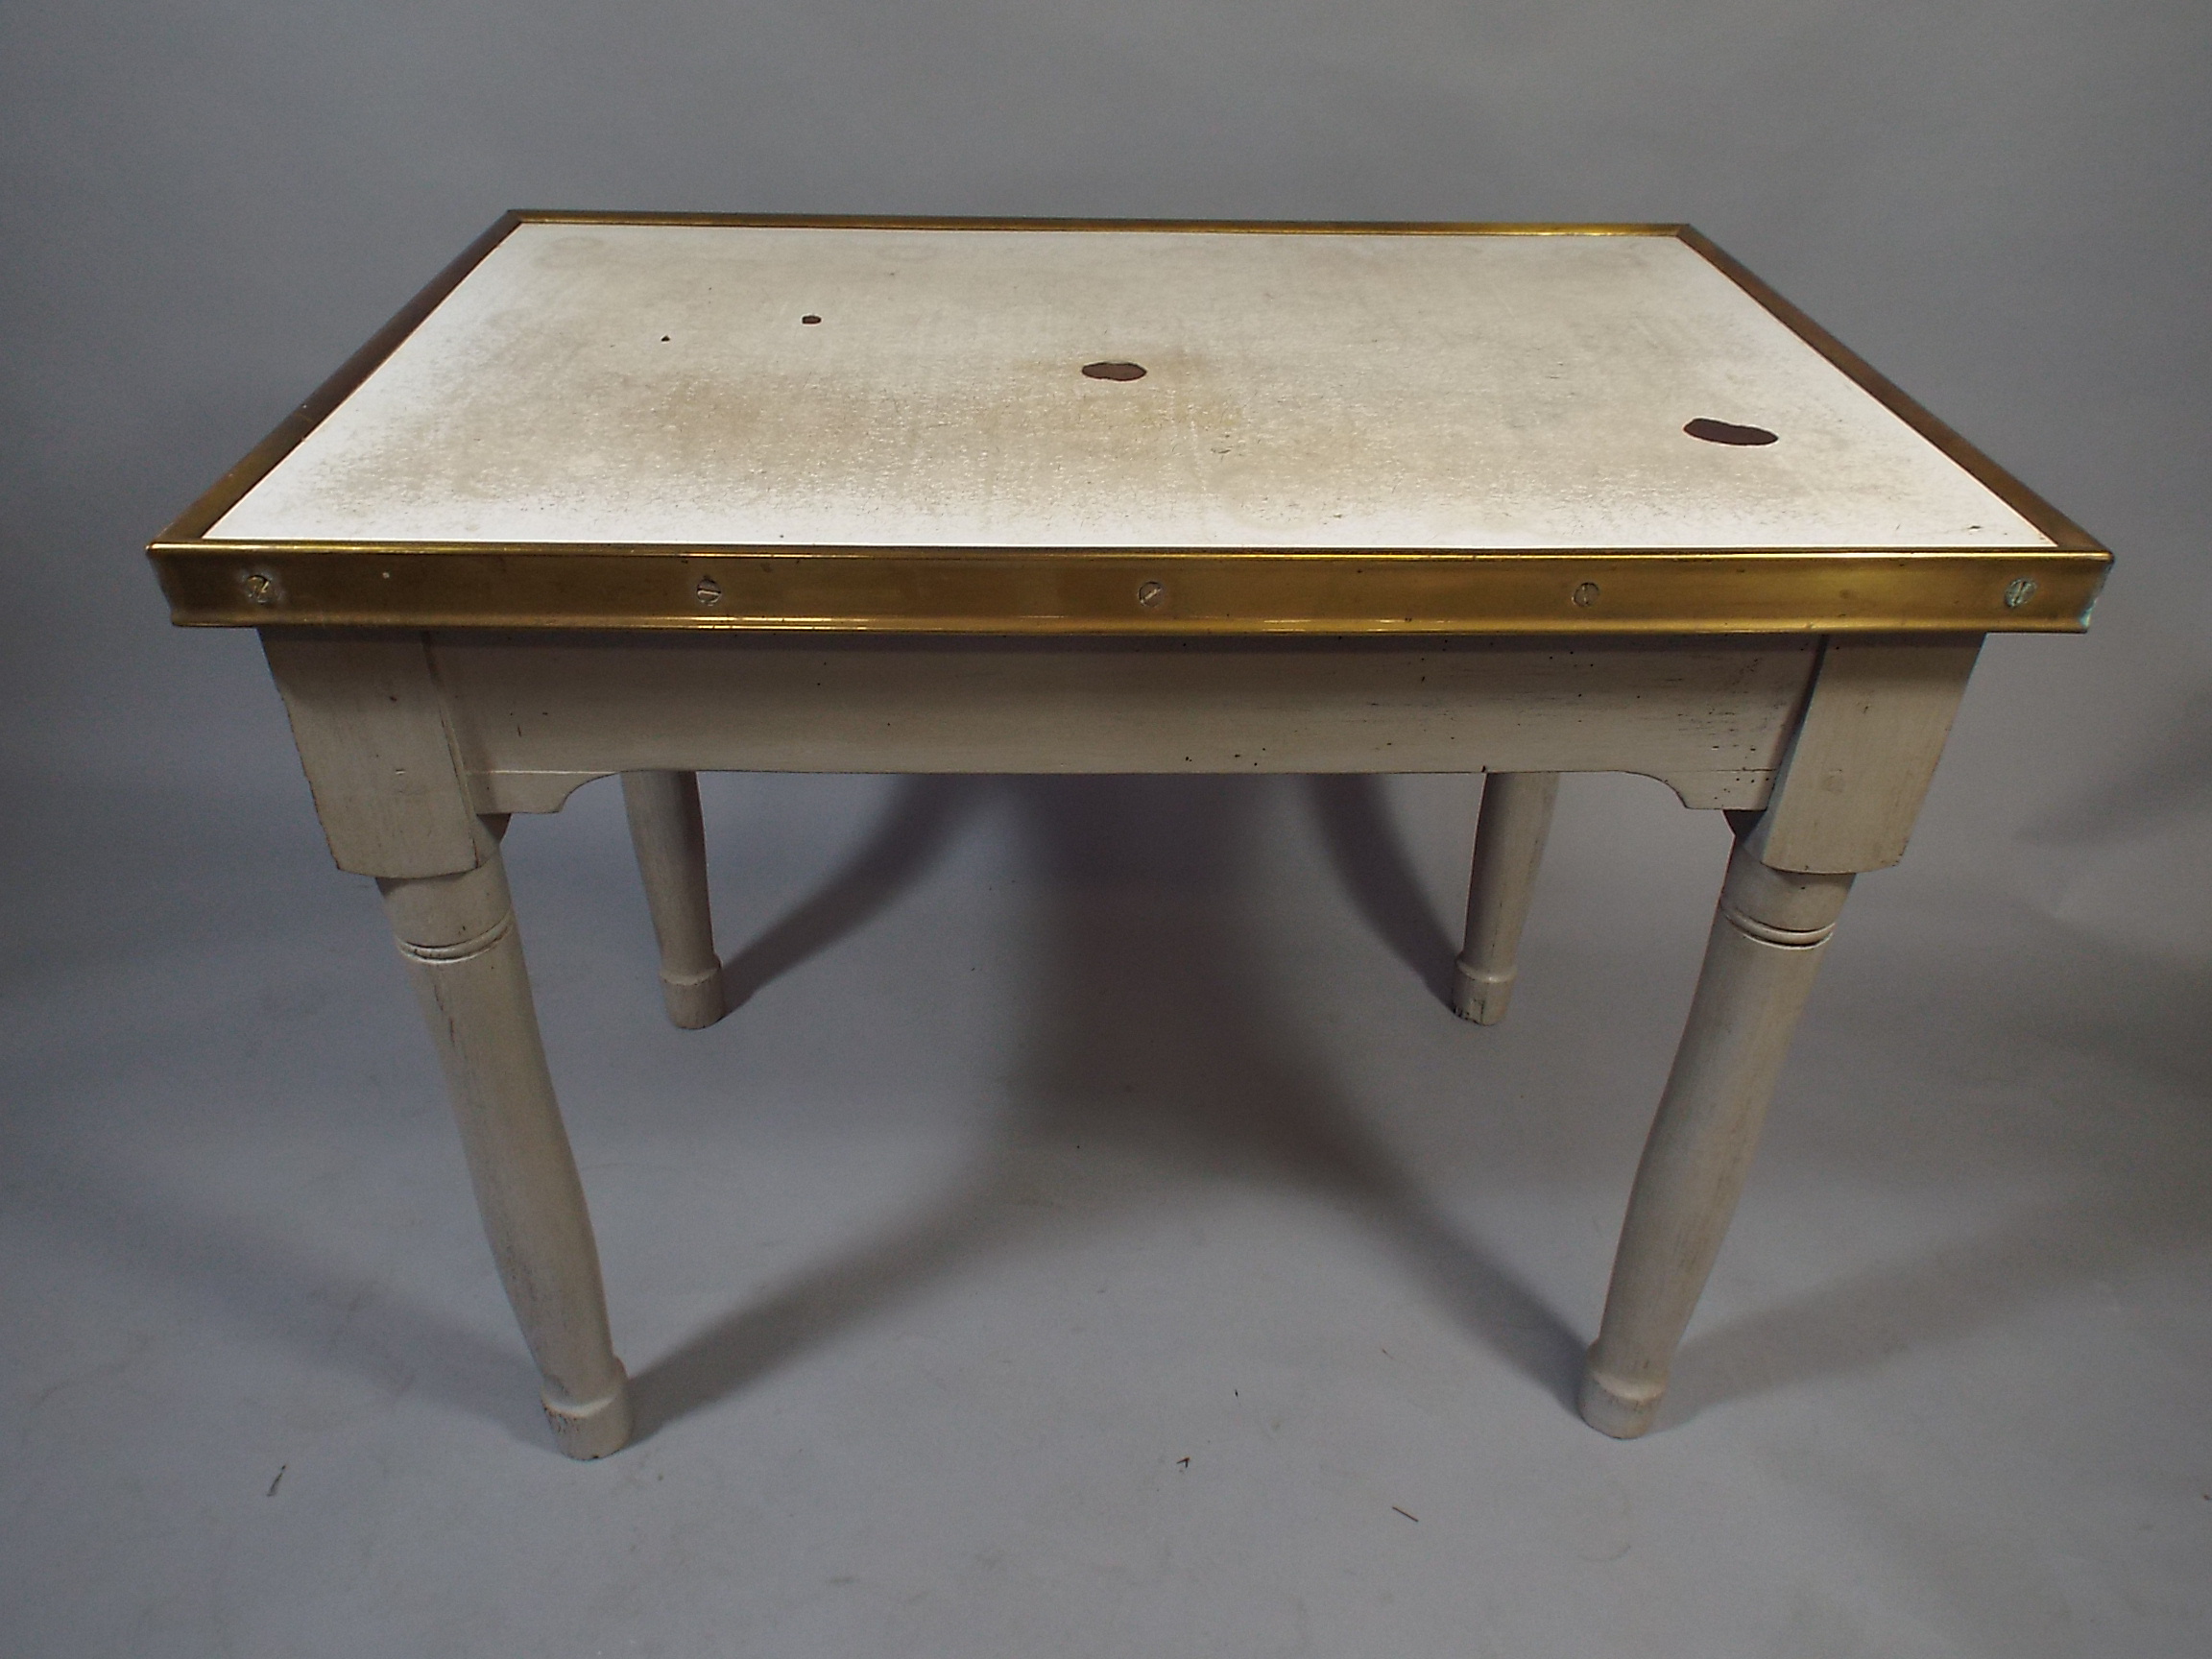 A 19th Century Dairy Table with a Brass Framed Enamel Top, Over Four Painted Turned Legs.